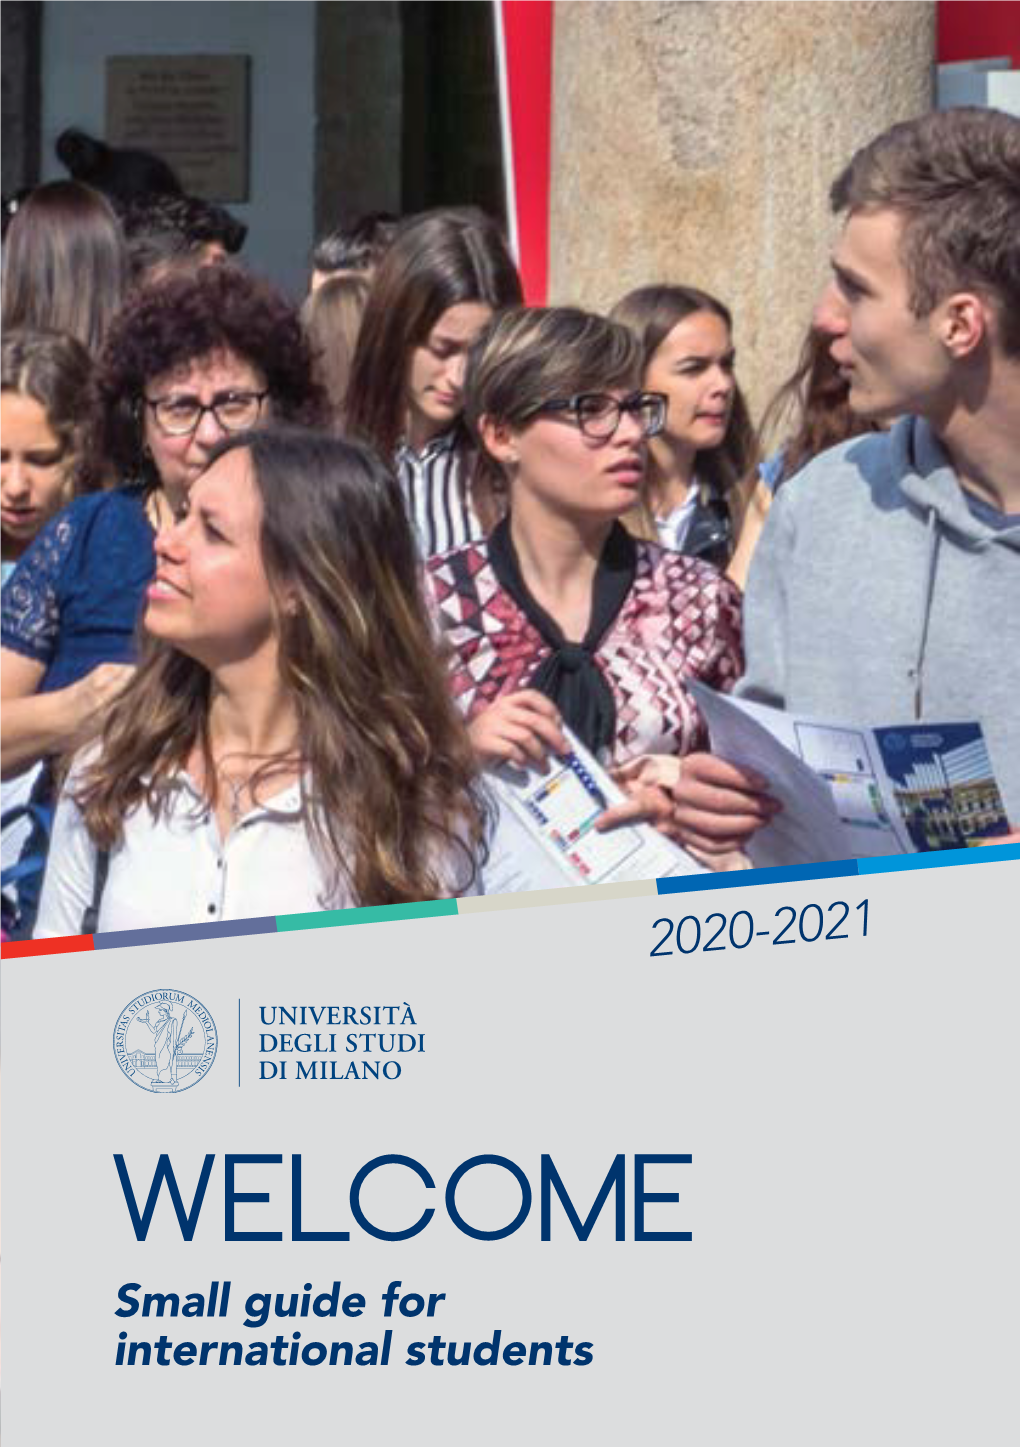 Welcome Desk of the International Students Office Was Created, a University Service for Students, Doctoral Students and Interns Who Come to Milan for the First Time